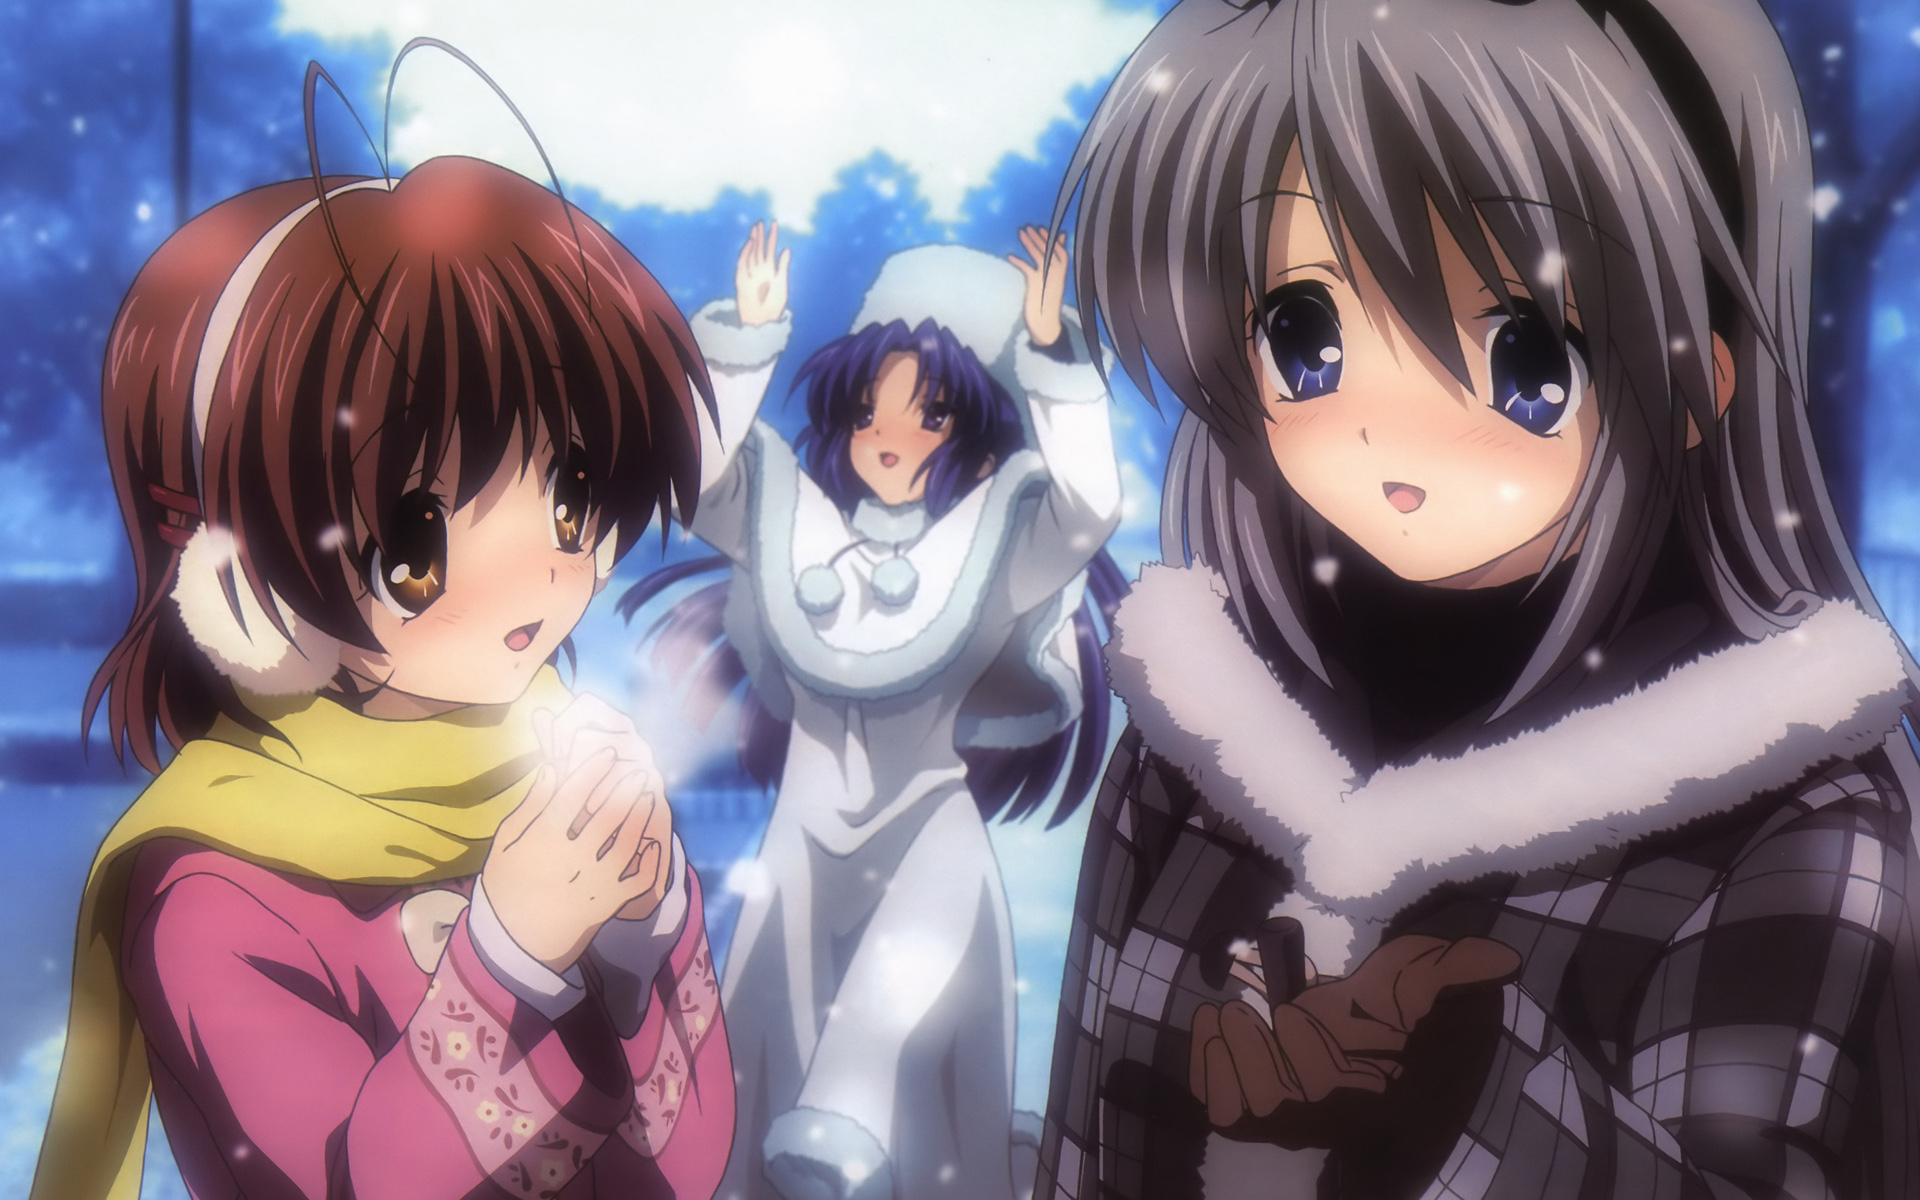 Clannad Pics Clannad And Clannad After 高画質あり Clannad画像 壁紙 動画集 100枚超 Naver まとめ